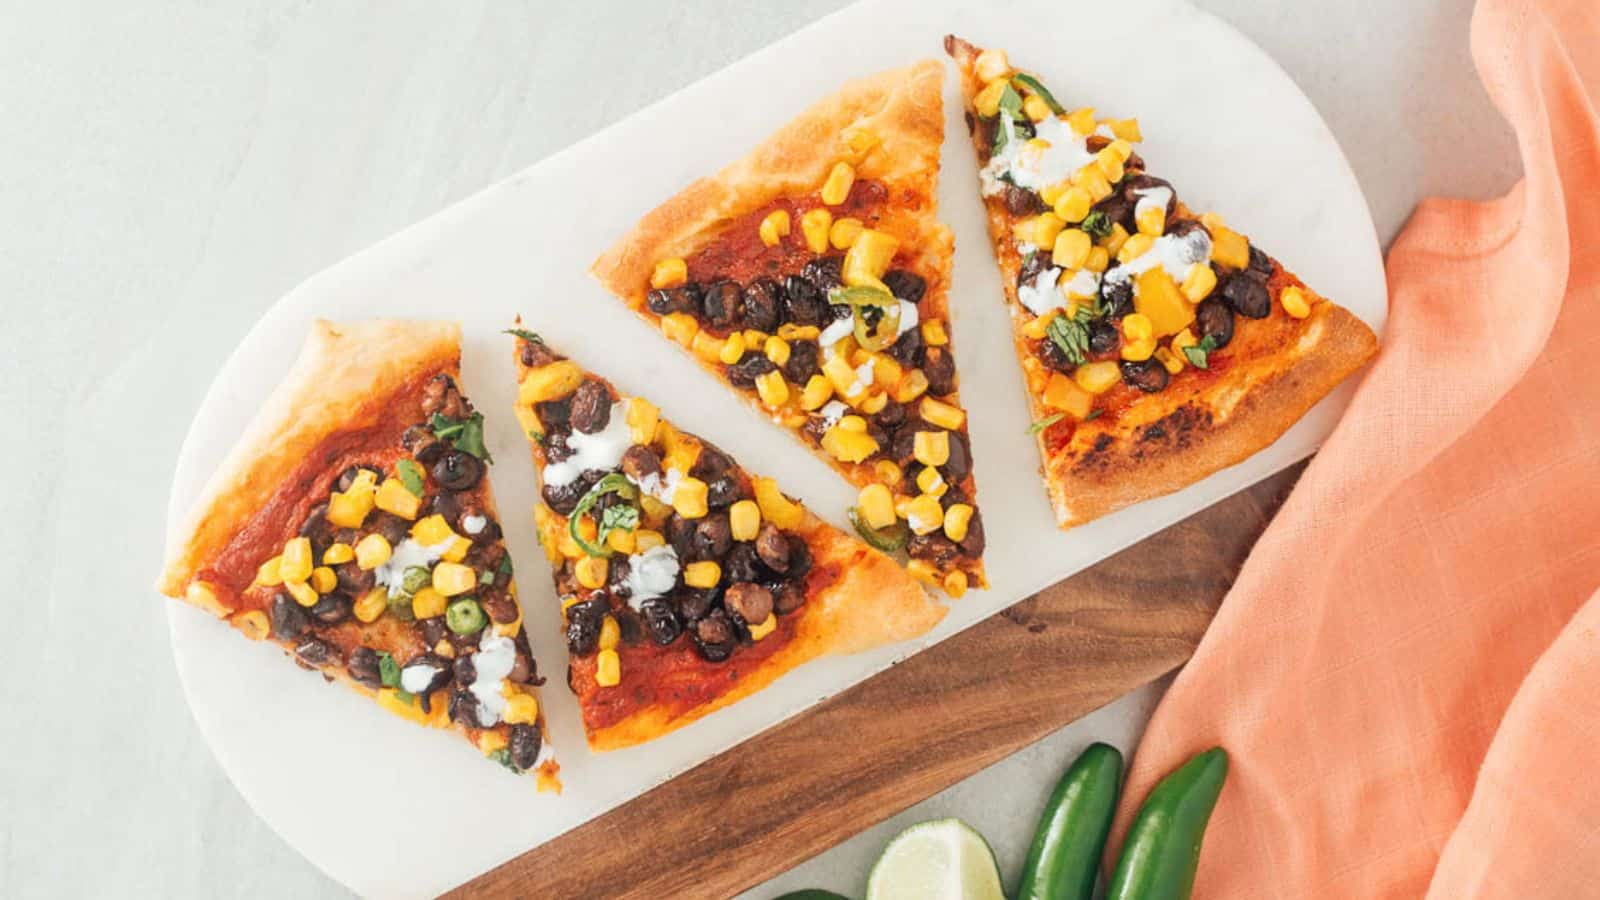 <p>If you're looking for a lively twist on pizza night, try our Easy Vegan Chili Pizza. It's spicy, flavorful, and completely plant-based, offering a exciting alternative to traditional pizza toppings. It sparks conversation and tastes as unique as it sounds. A wonderful way to spice up your mealtime.<br><strong>Get the Recipe: </strong><a href="https://twocityvegans.com/easy-vegan-chili-pizza/?utm_source=msn&utm_medium=page&utm_campaign=">Easy Vegan Chili Pizza</a></p>